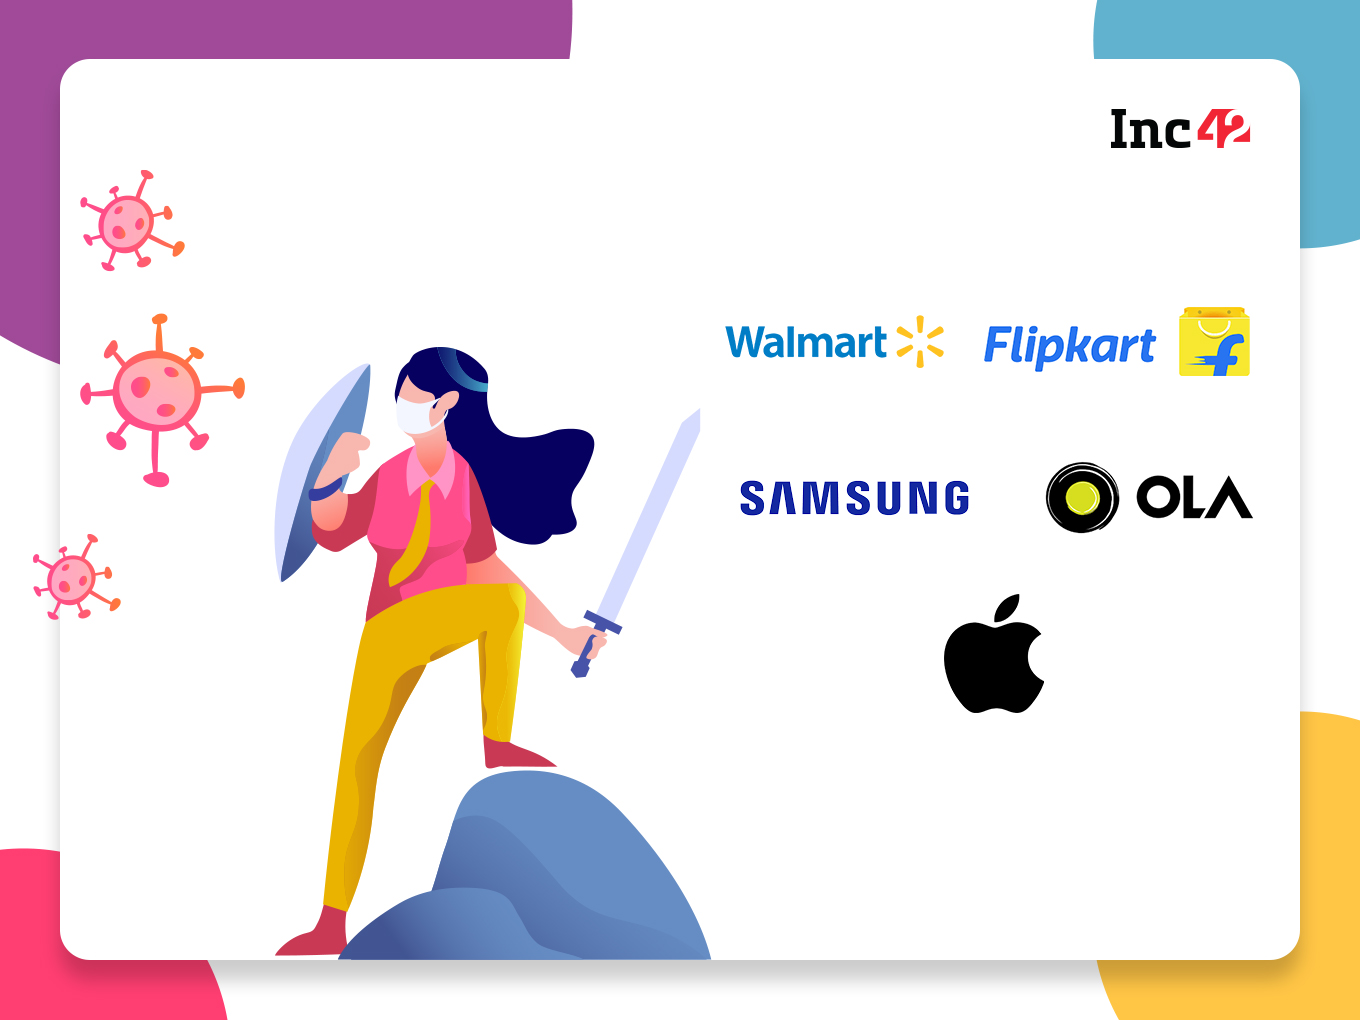 #Startups Vs Covid19: India Looks To Curb Chinese Takeovers Flipkart Walmart Make Big Donations On Day 25